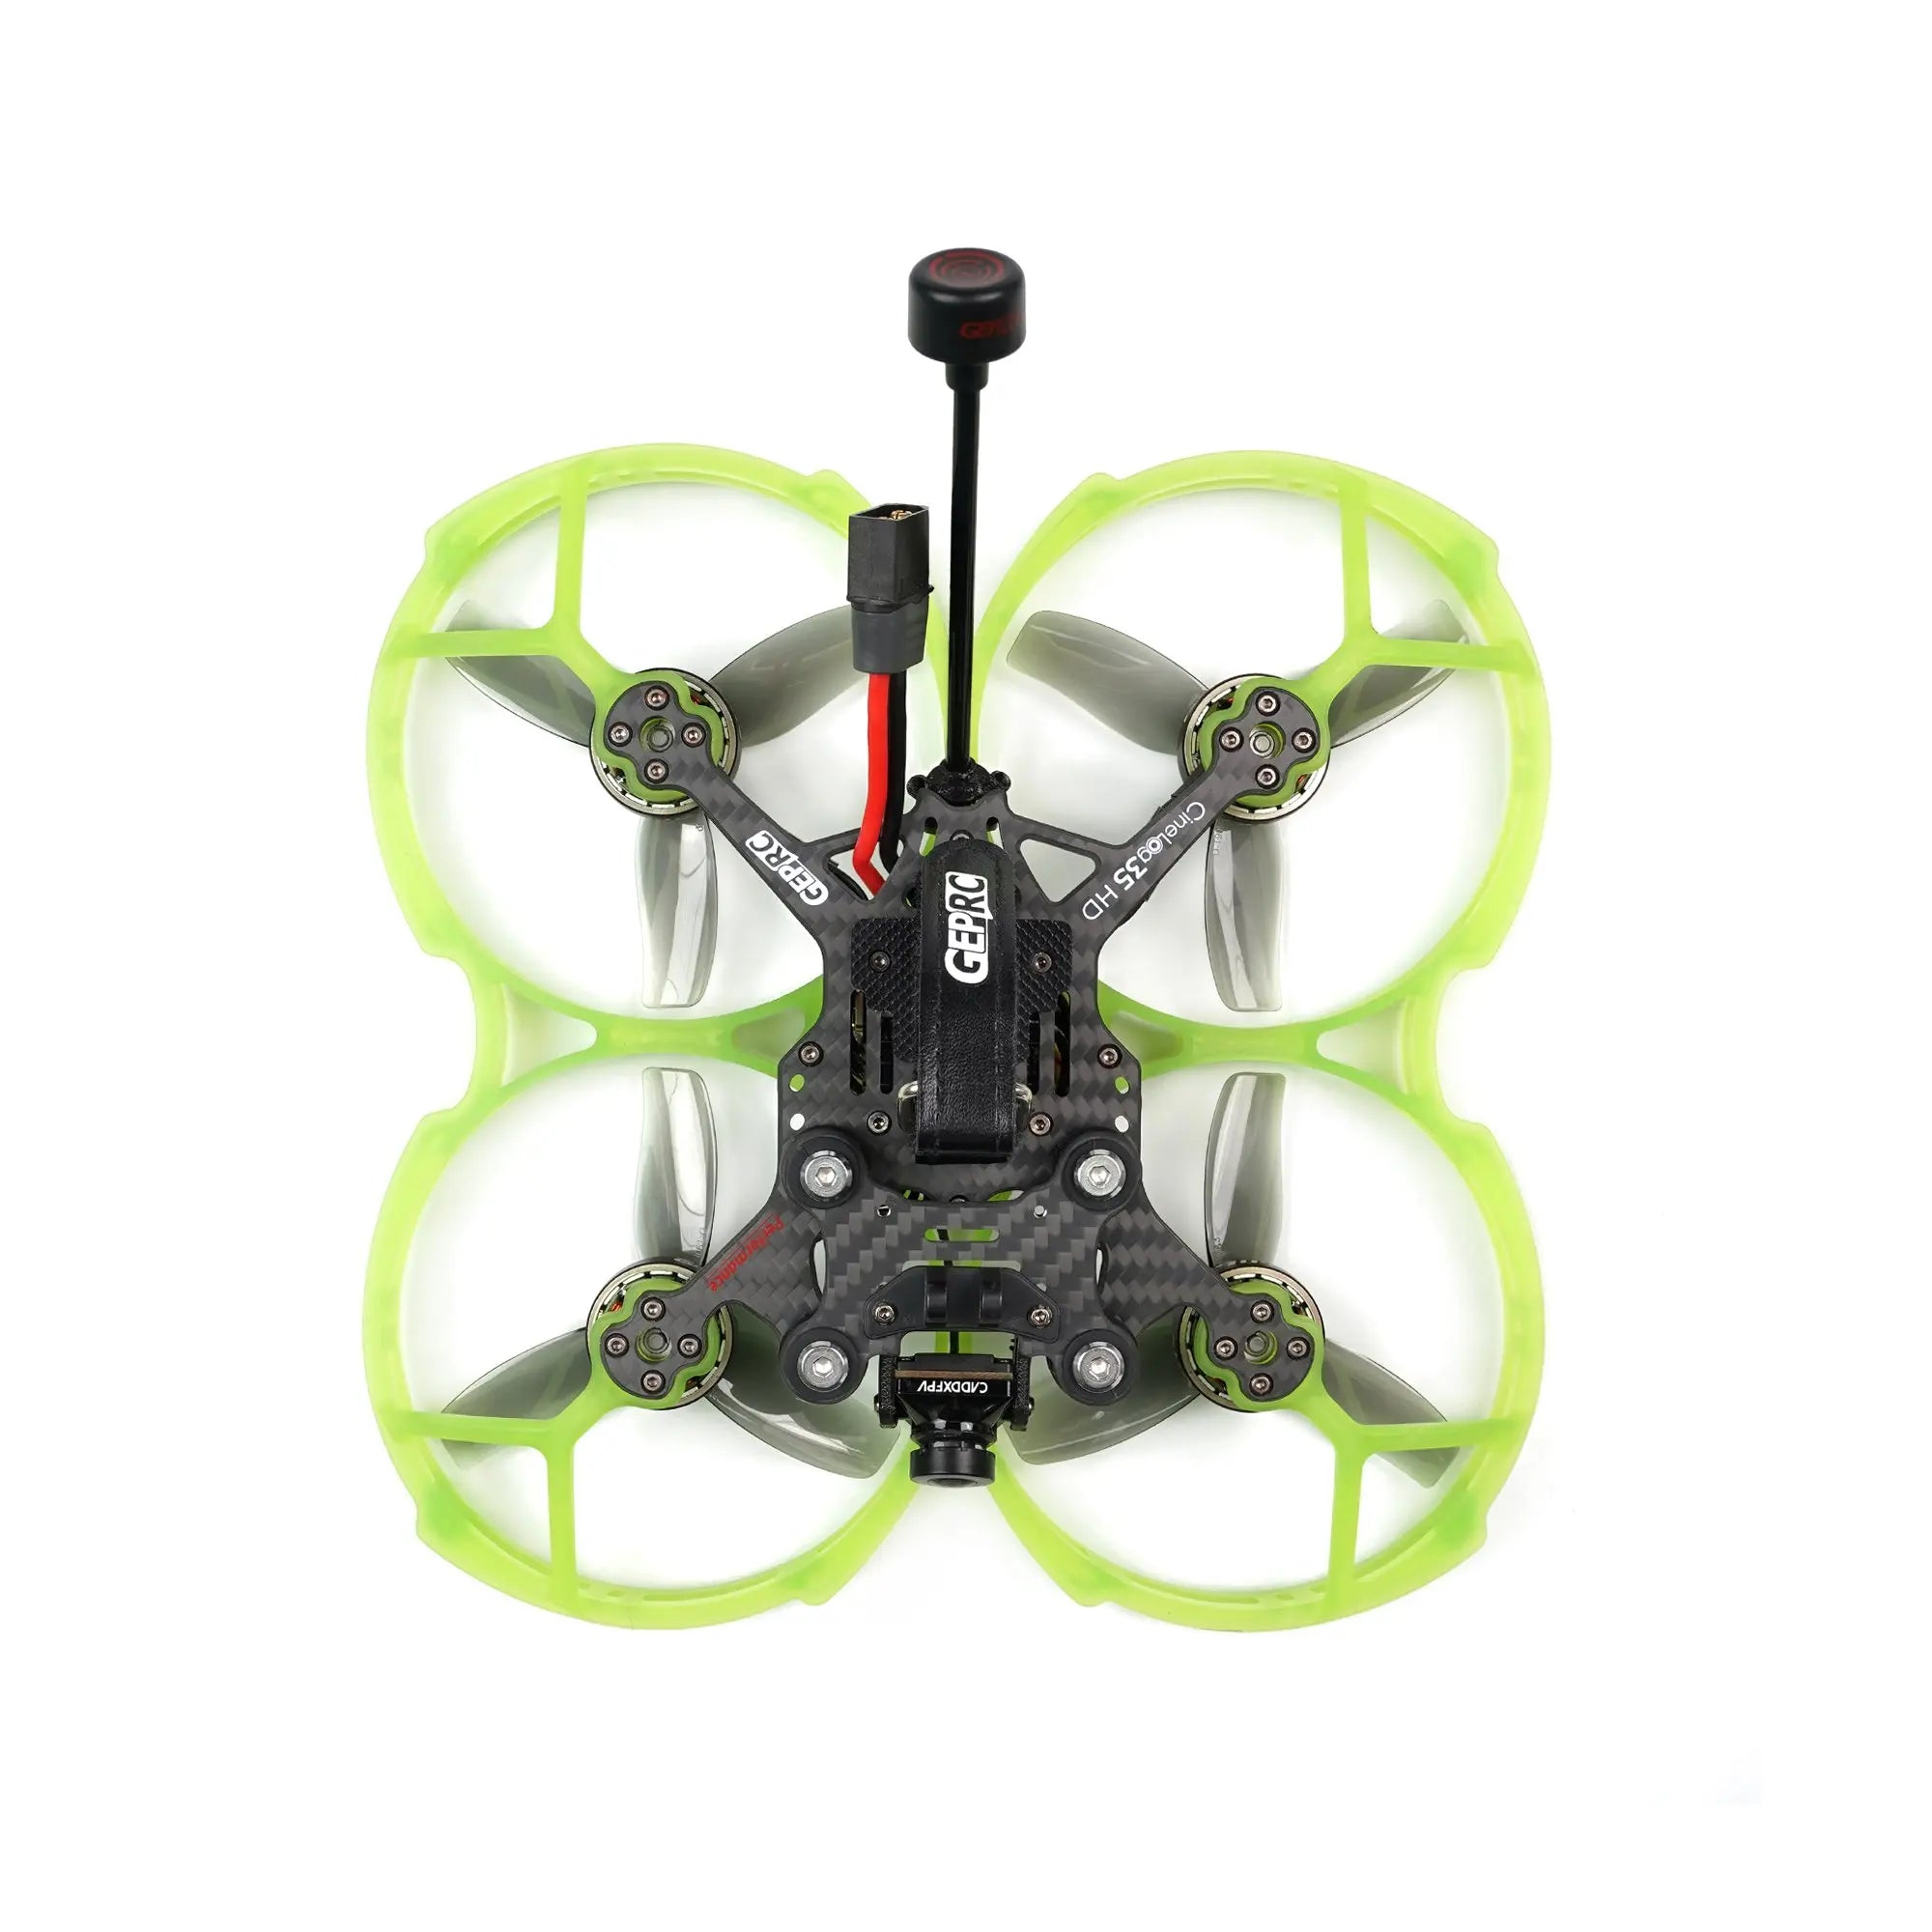 GEPRC CineLog35 FPV Drone, FPV quad that combines Cinematic shooting, Freestyle, Racing and Cruising 